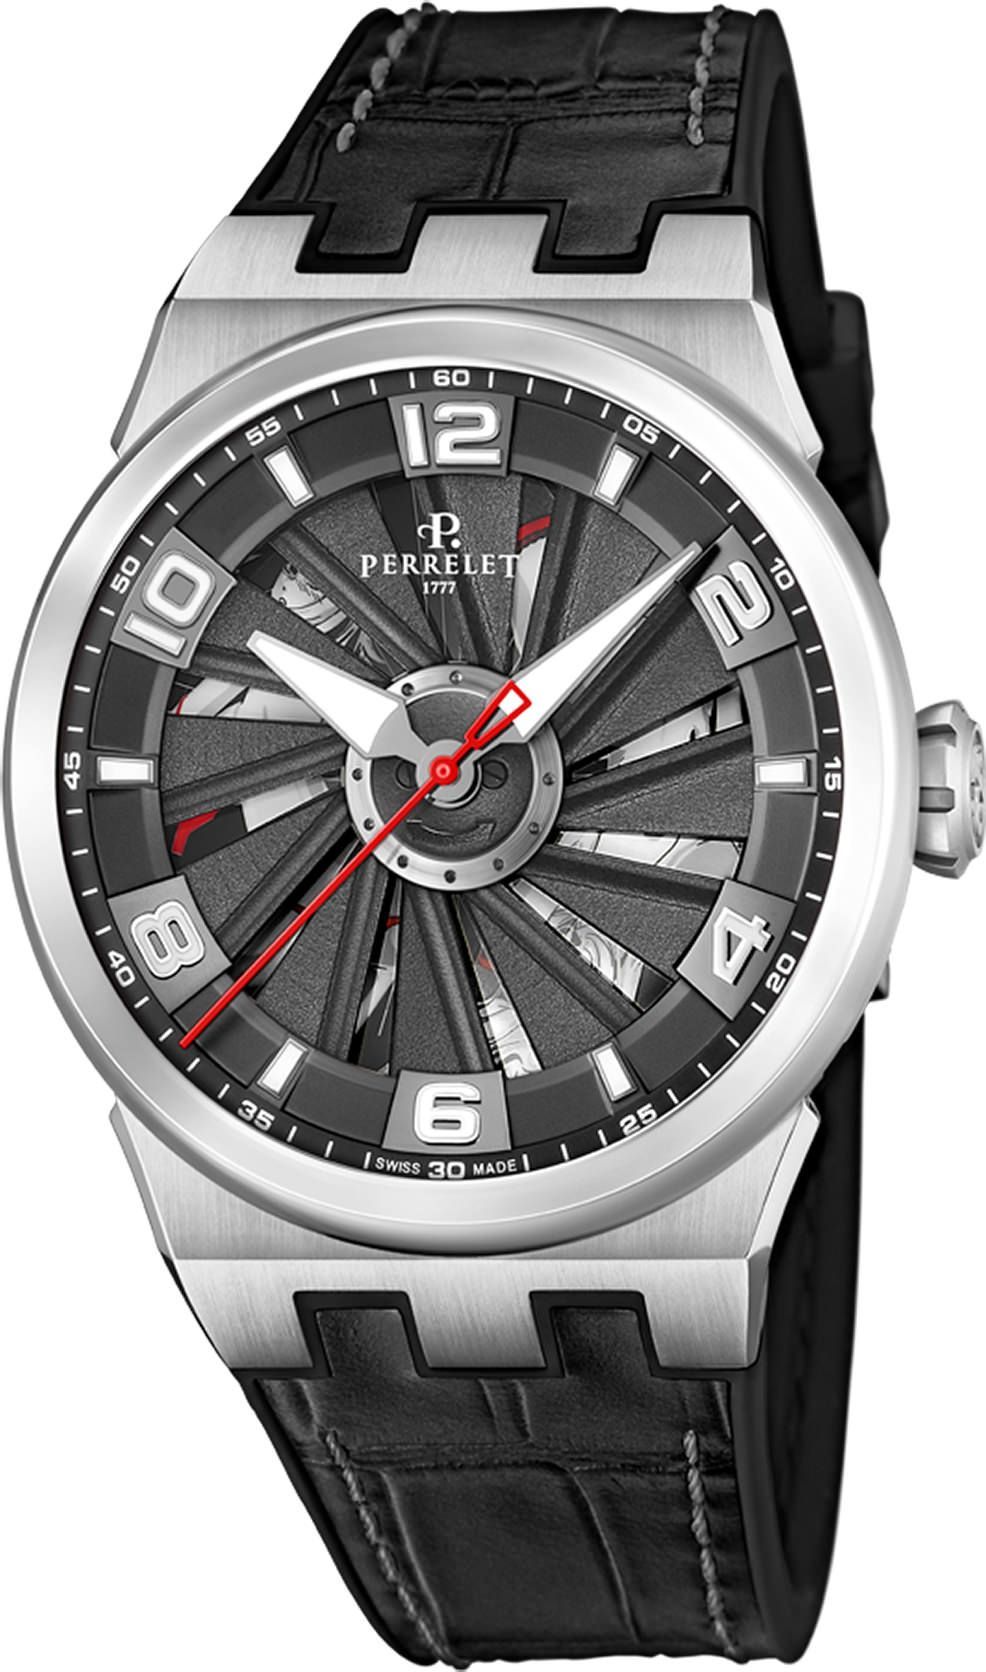 Perrelet Turbine Limited Edition Black Dial 44 mm Automatic Watch For Men - 1